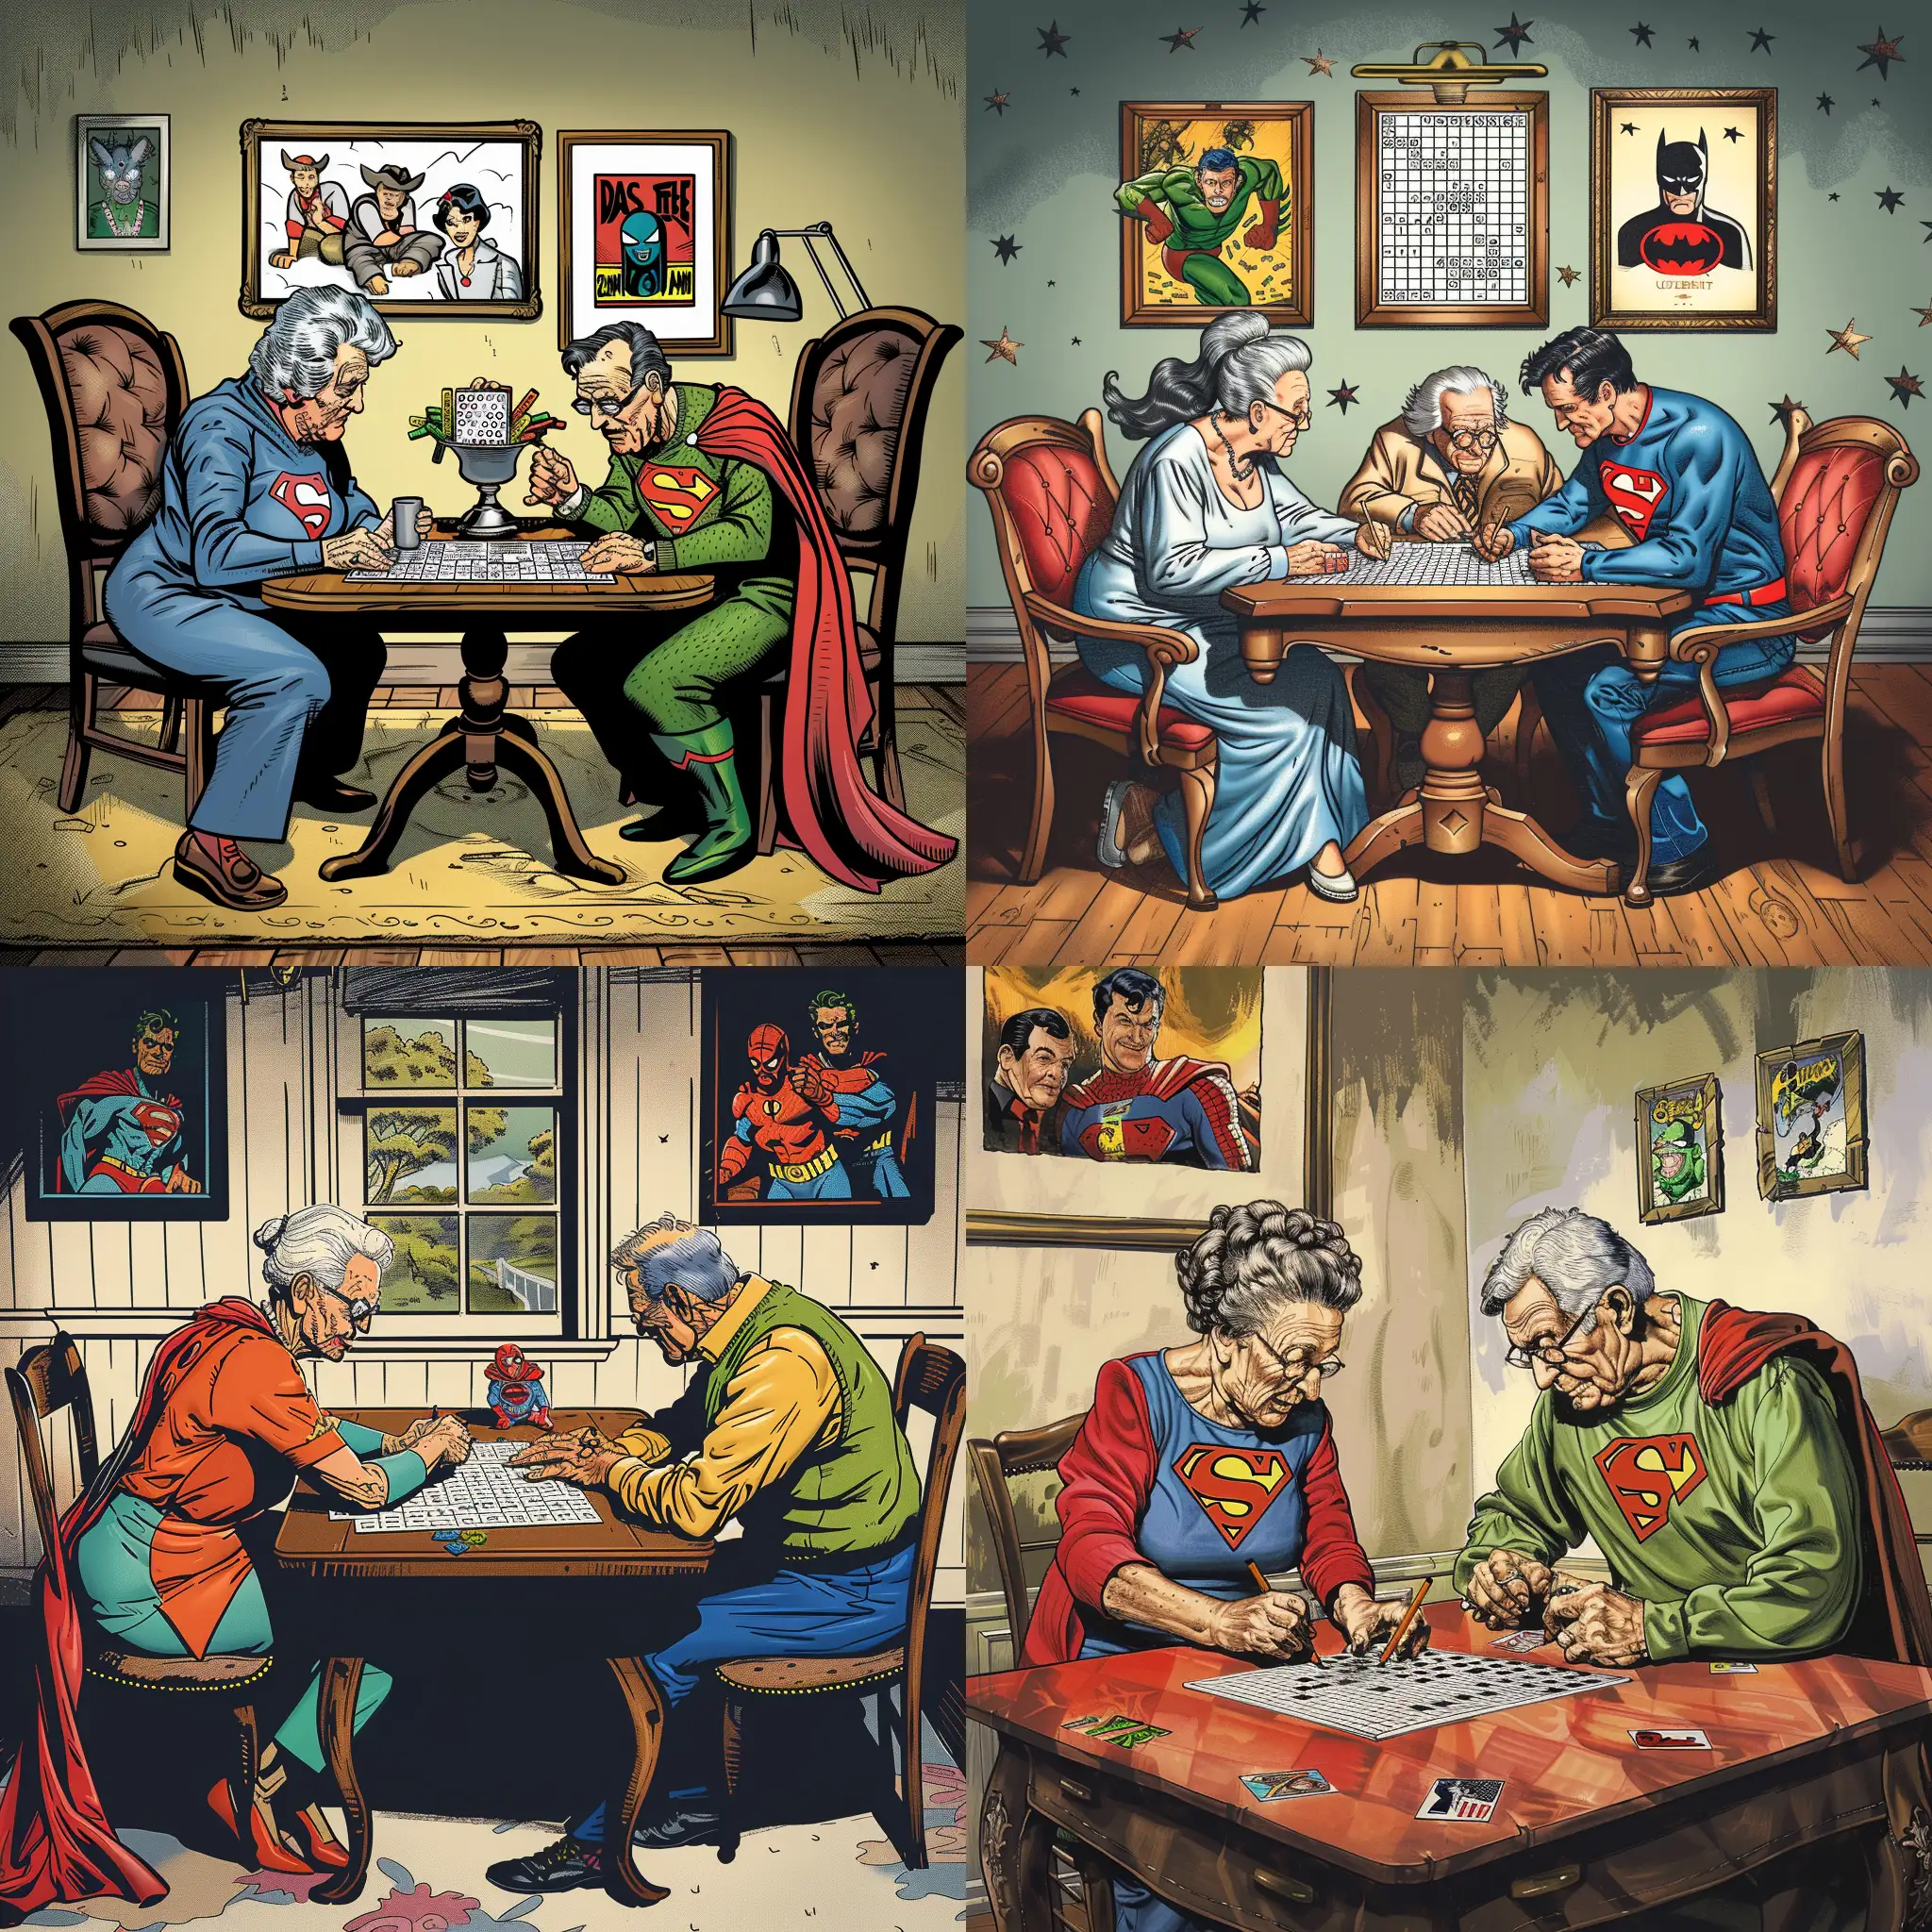 Imagine a grandma and grandpa sitting at a table doing word search puzzles, in color and comic book characters